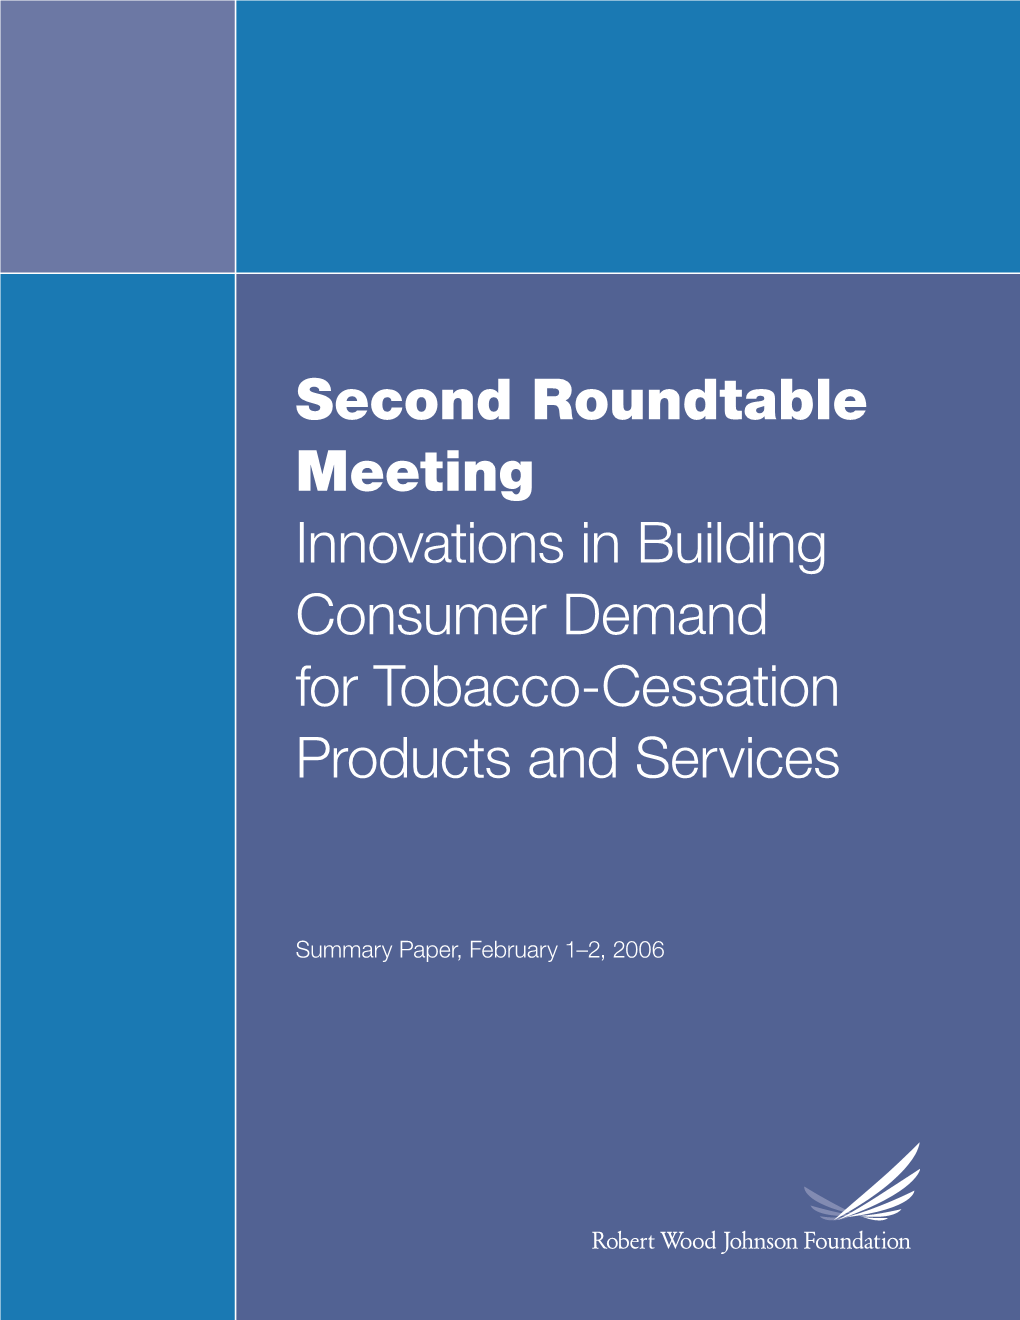 Second Roundtable Meeting Innovations in Building Consumer Demand for Tobacco-Cessation Products and Services